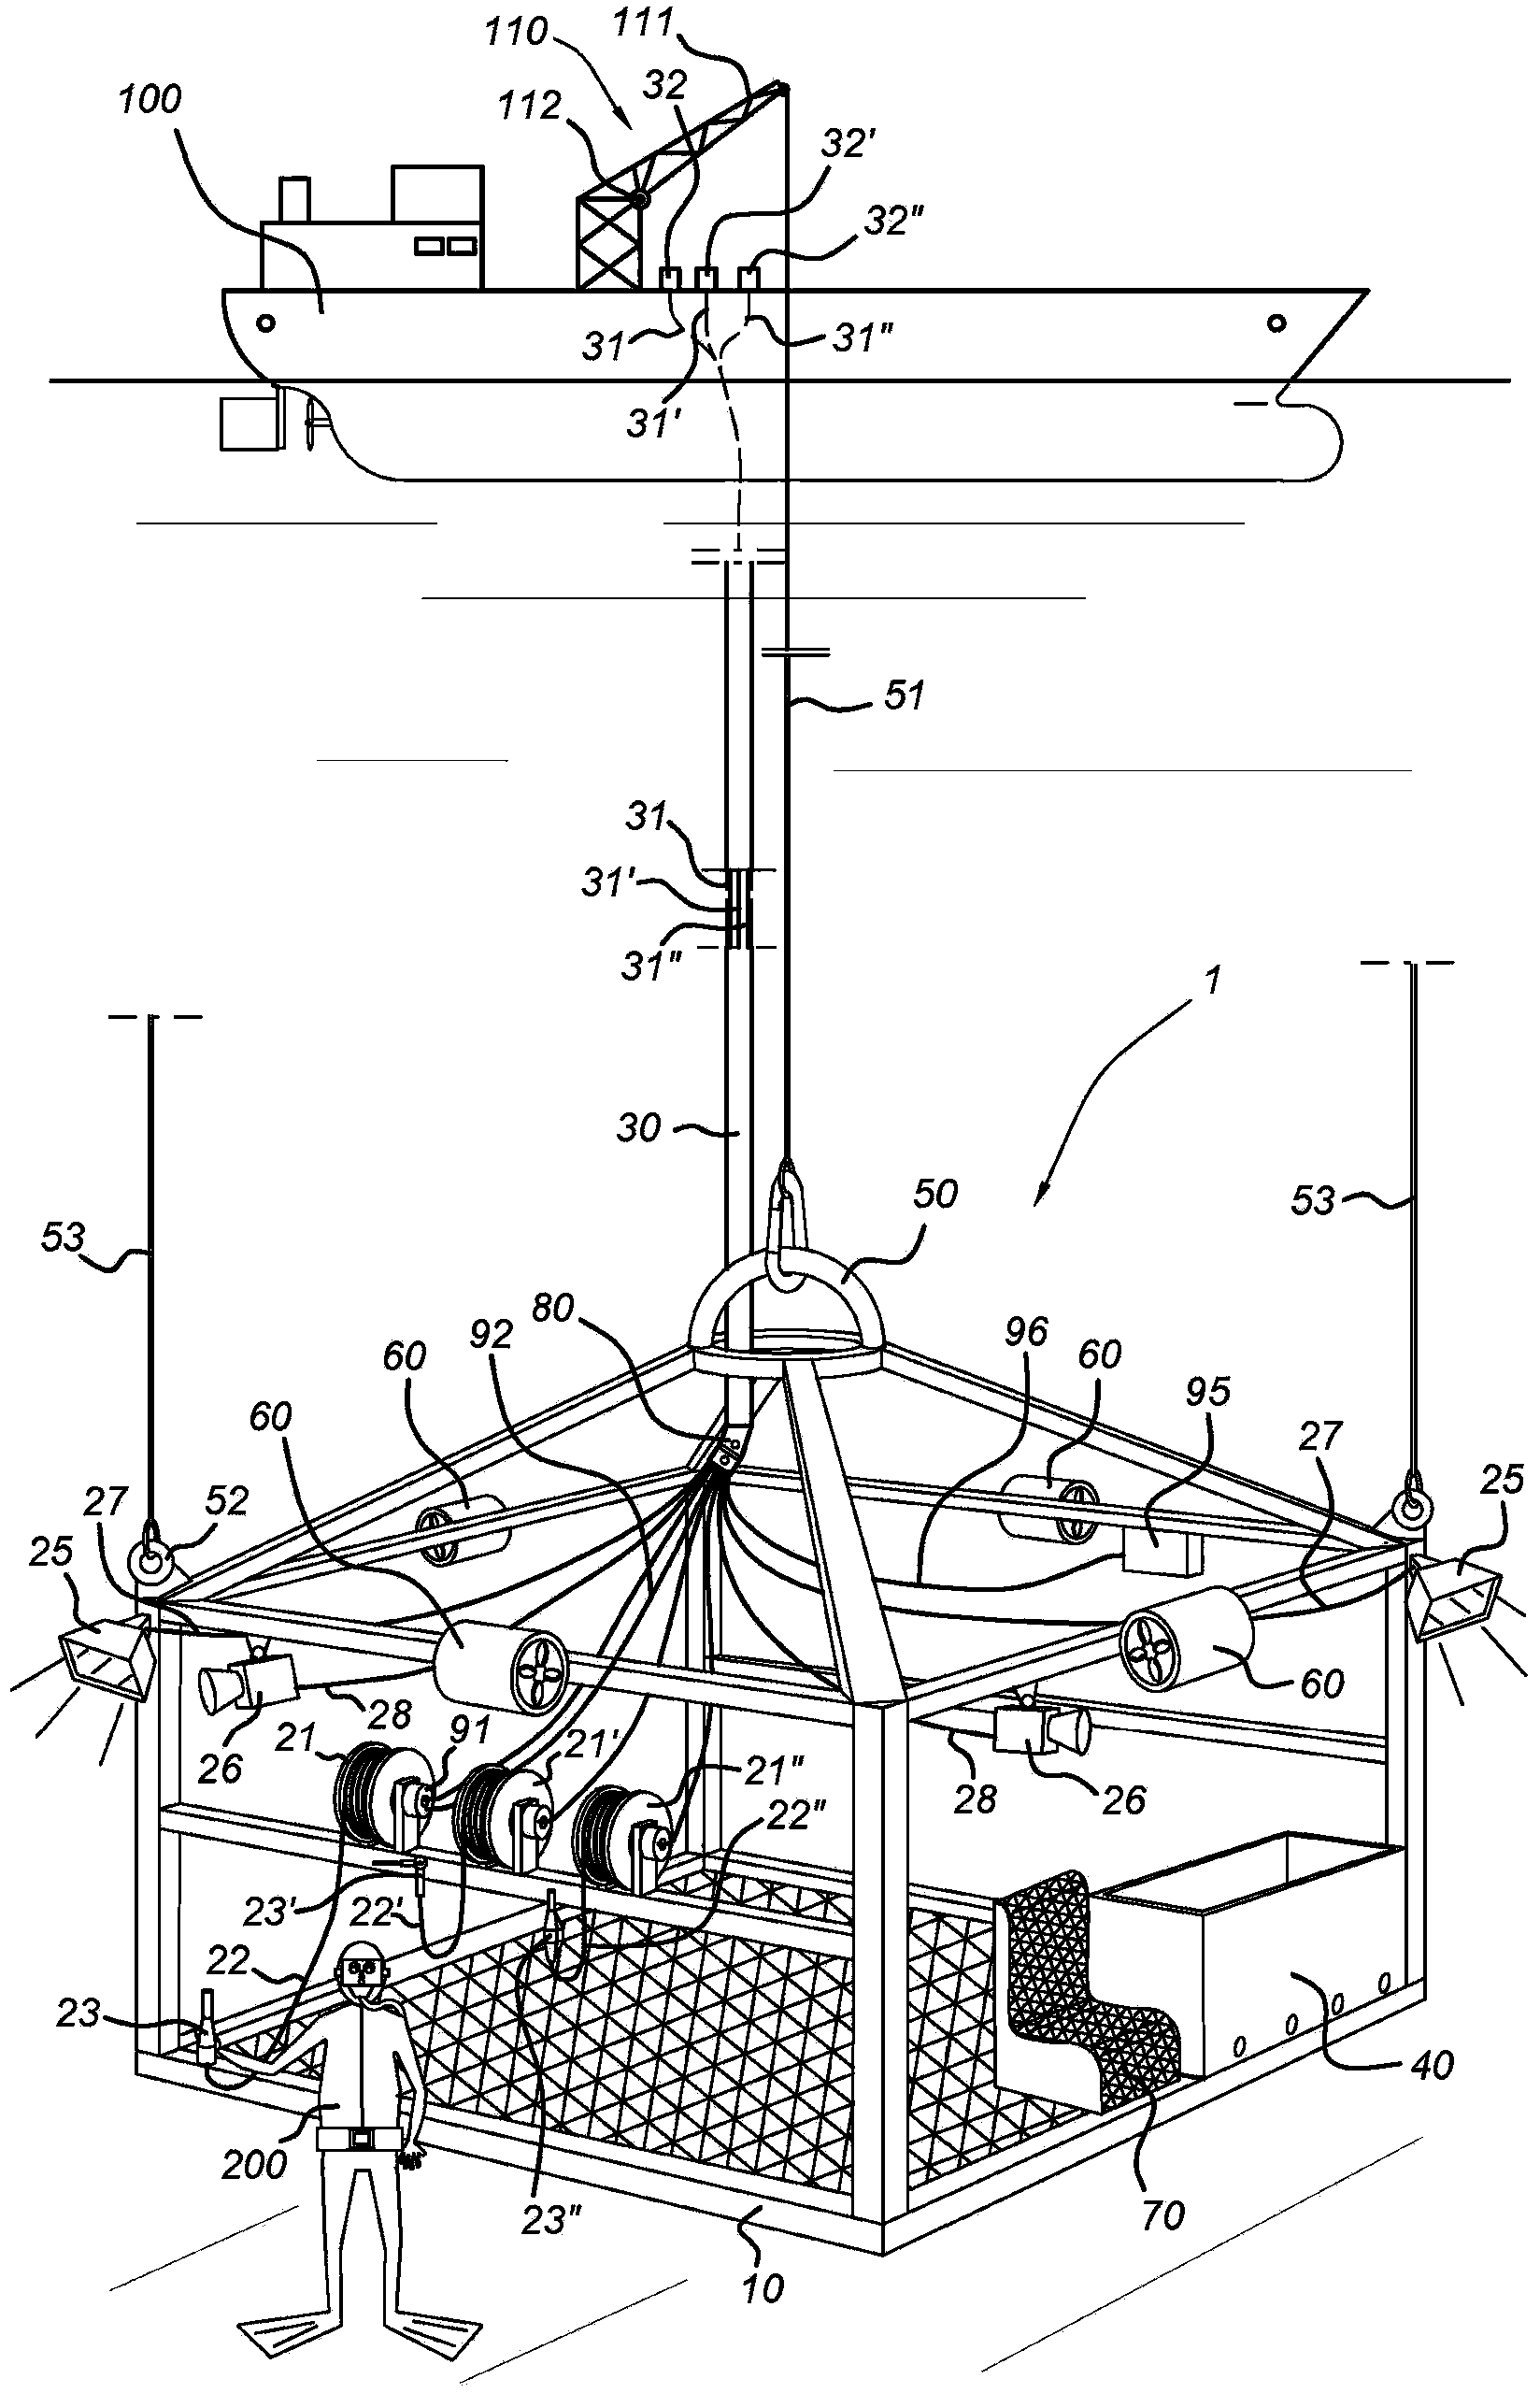 Workstation for transporting equipment to an underwater position